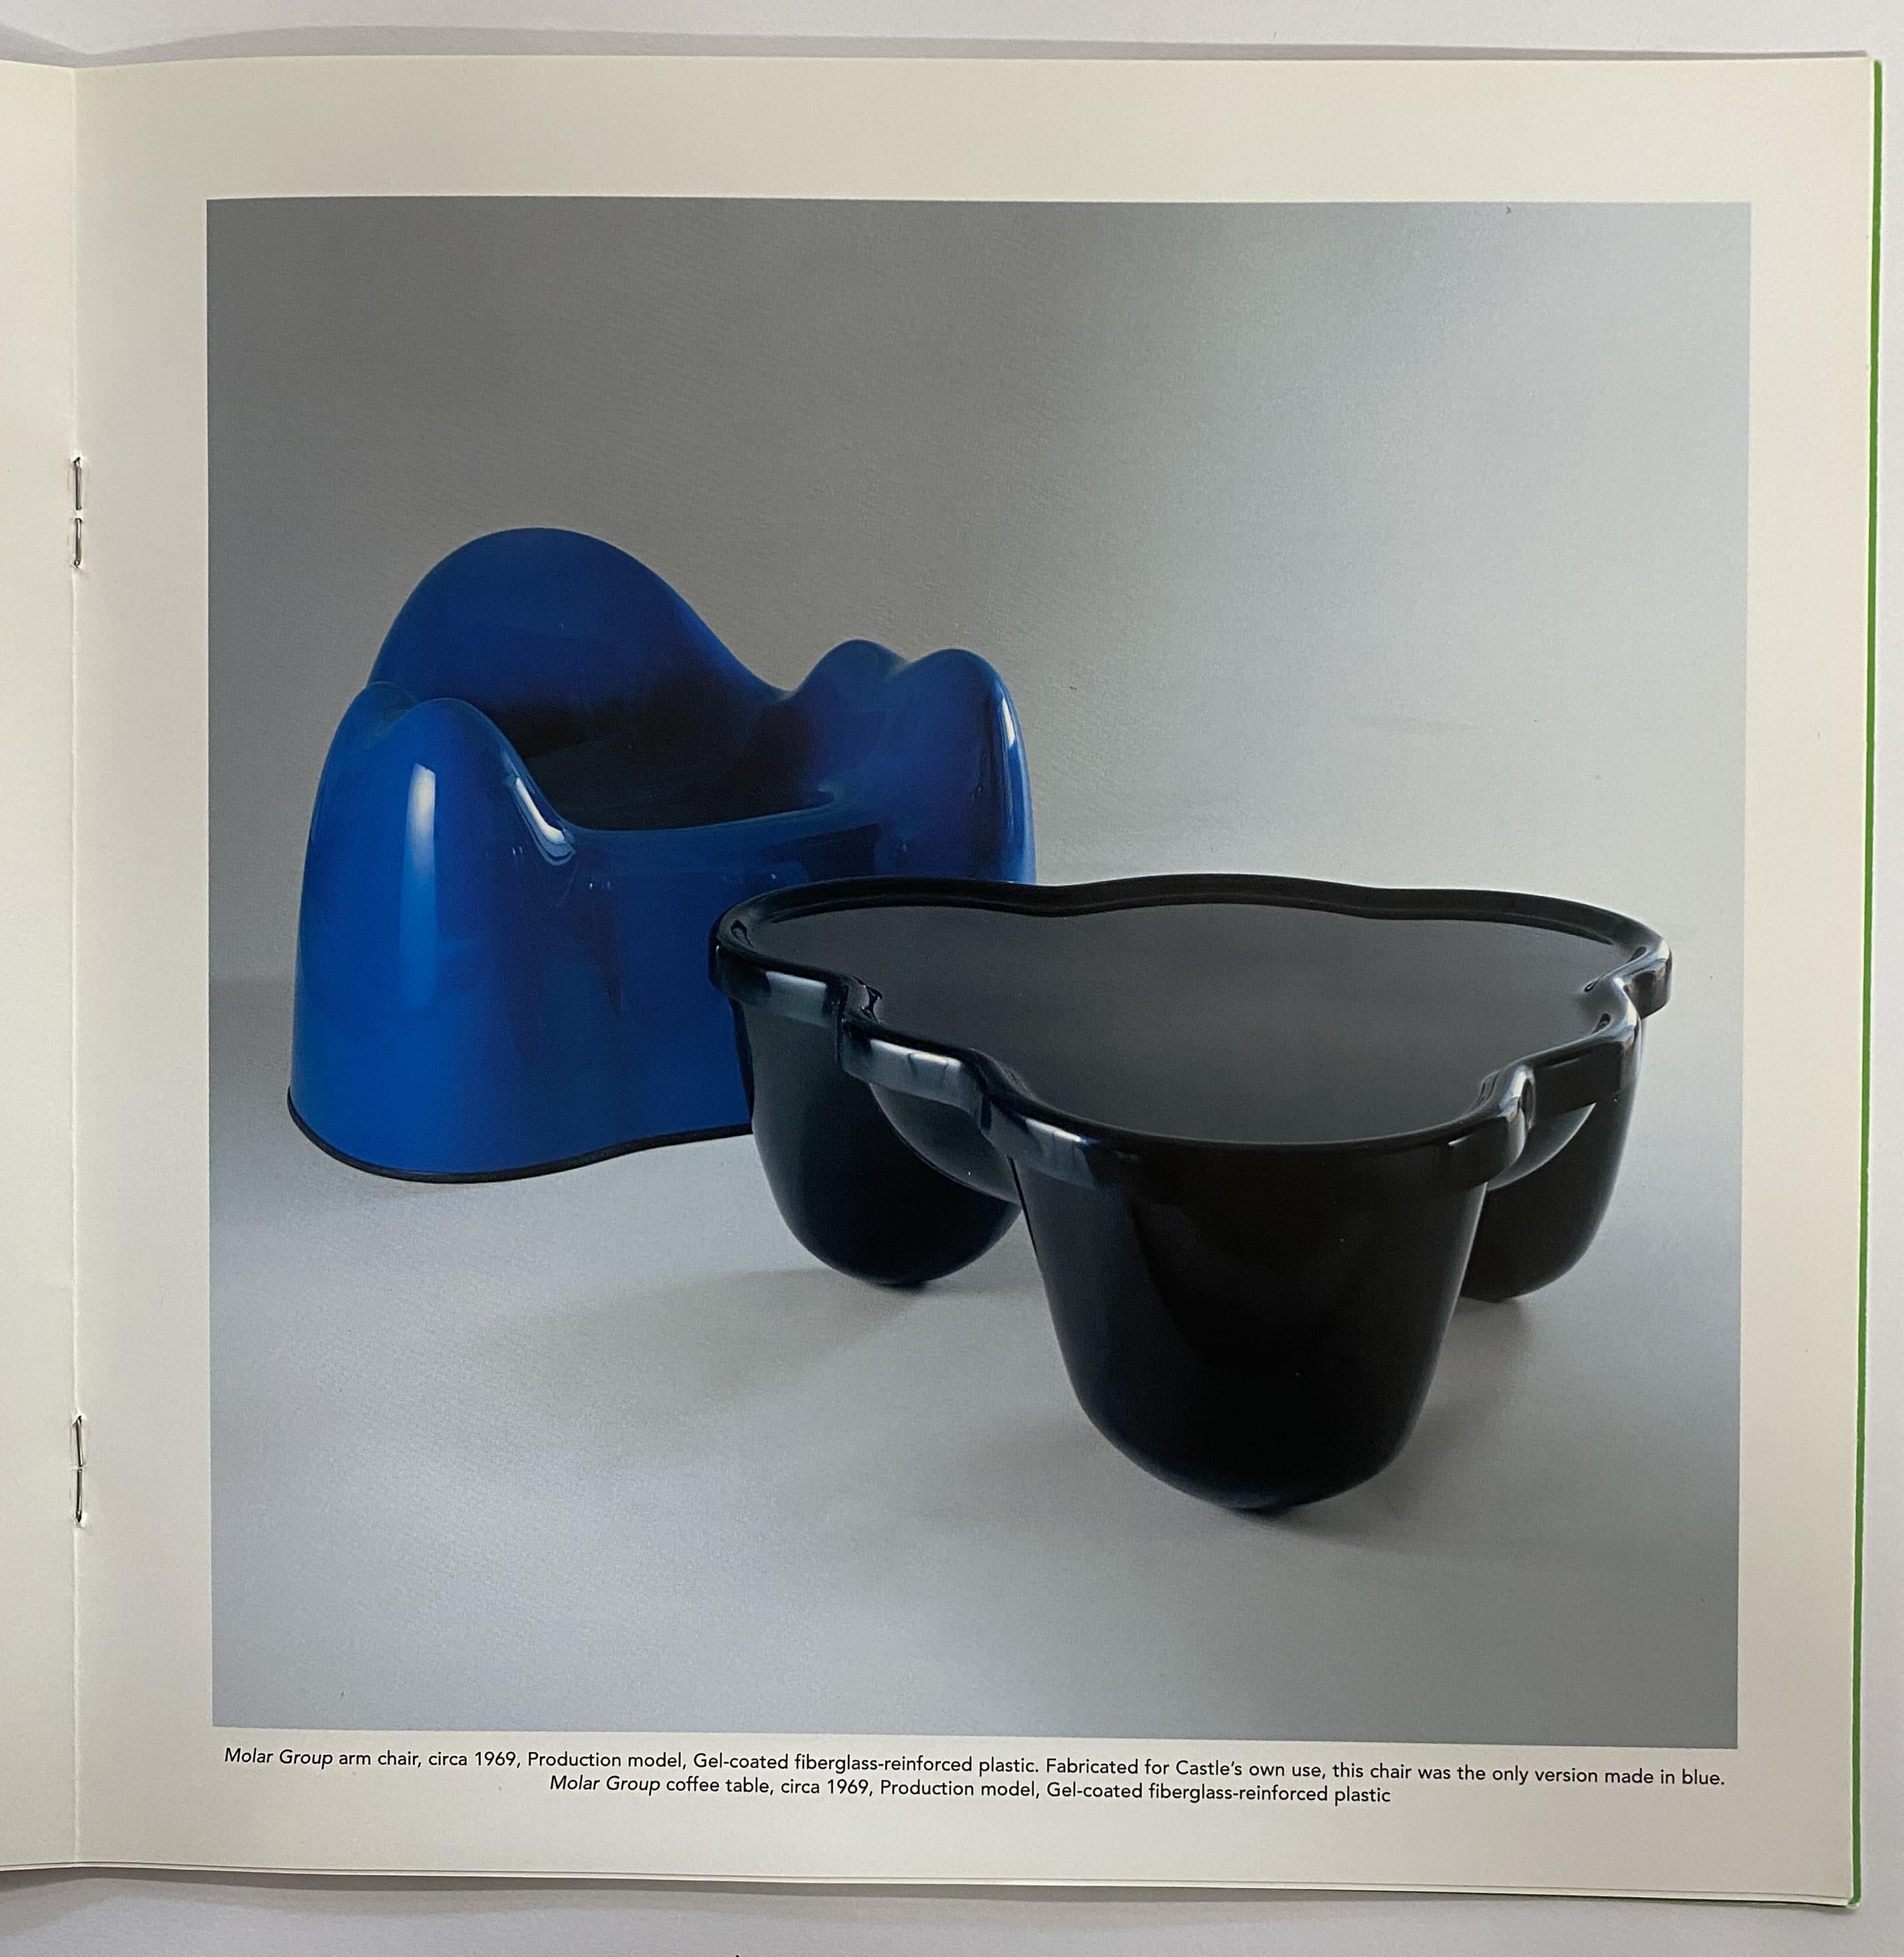 20th Century Auto Plastic: Wendell Castle 1968-1973 by Donald Albrecht (Book) For Sale